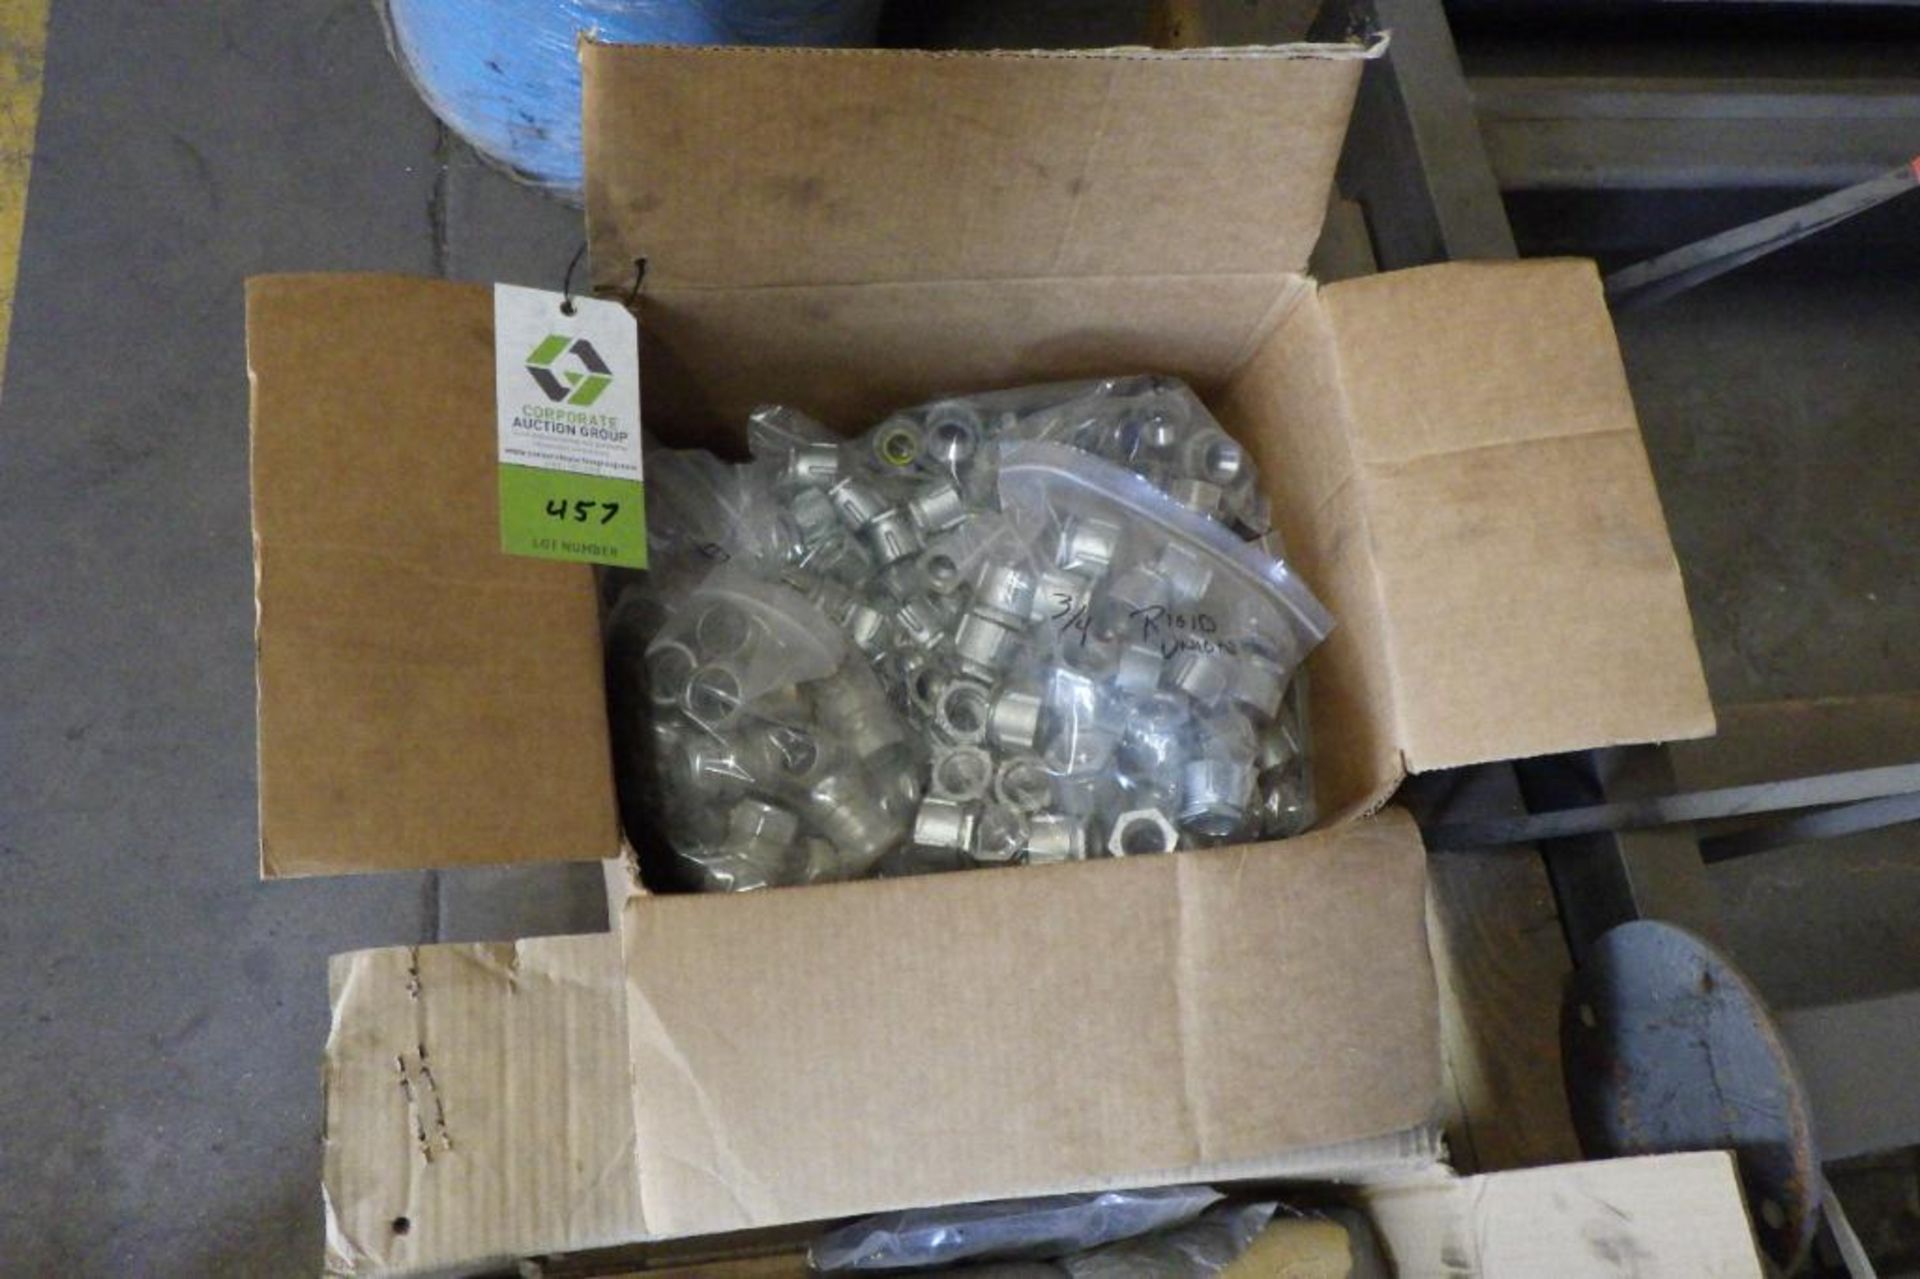 Box of new conduit fittings and unions